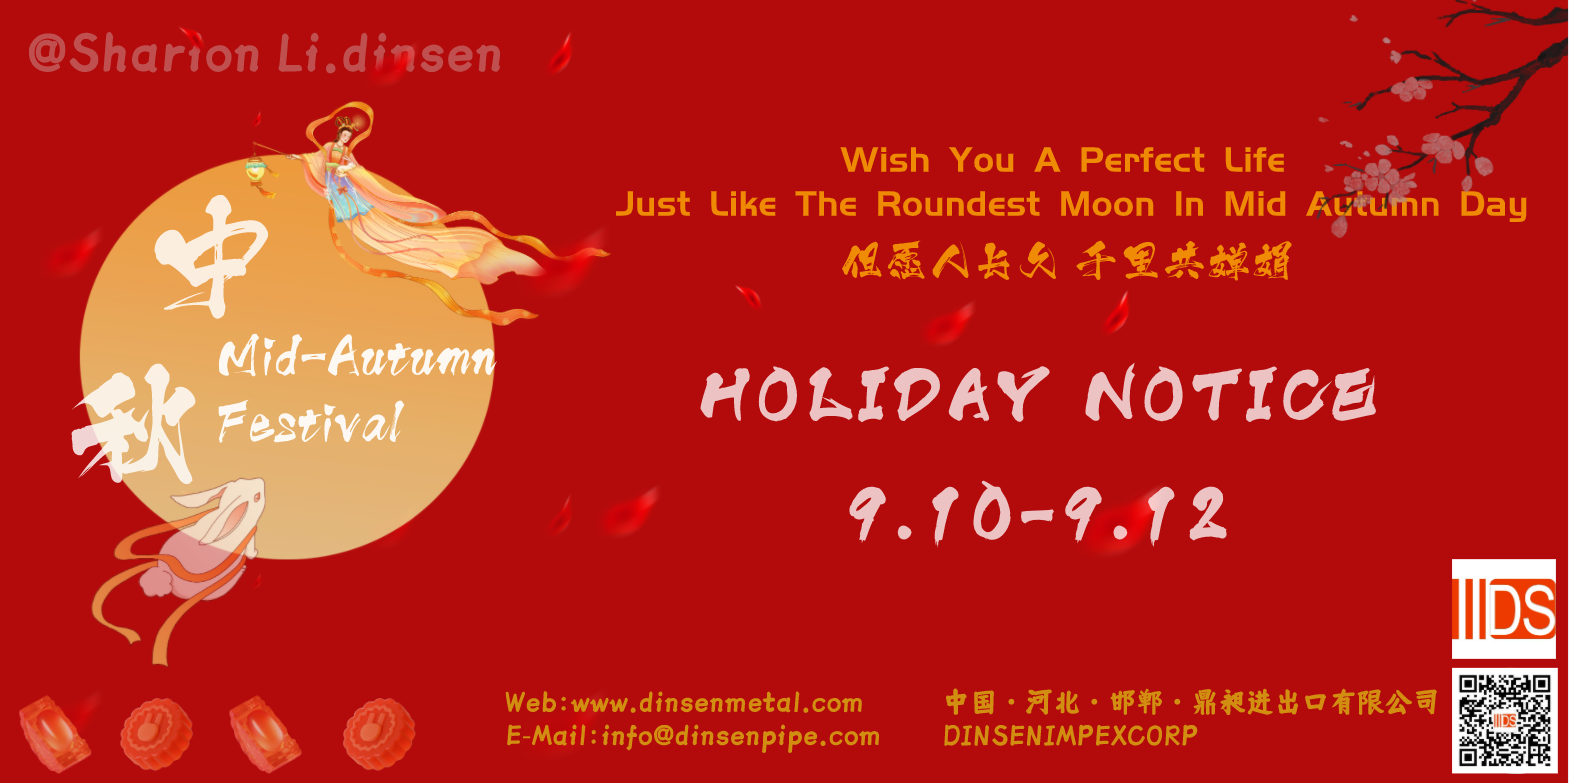 Happy Mid-Autumn Festival! And Publish The Holiday Notice